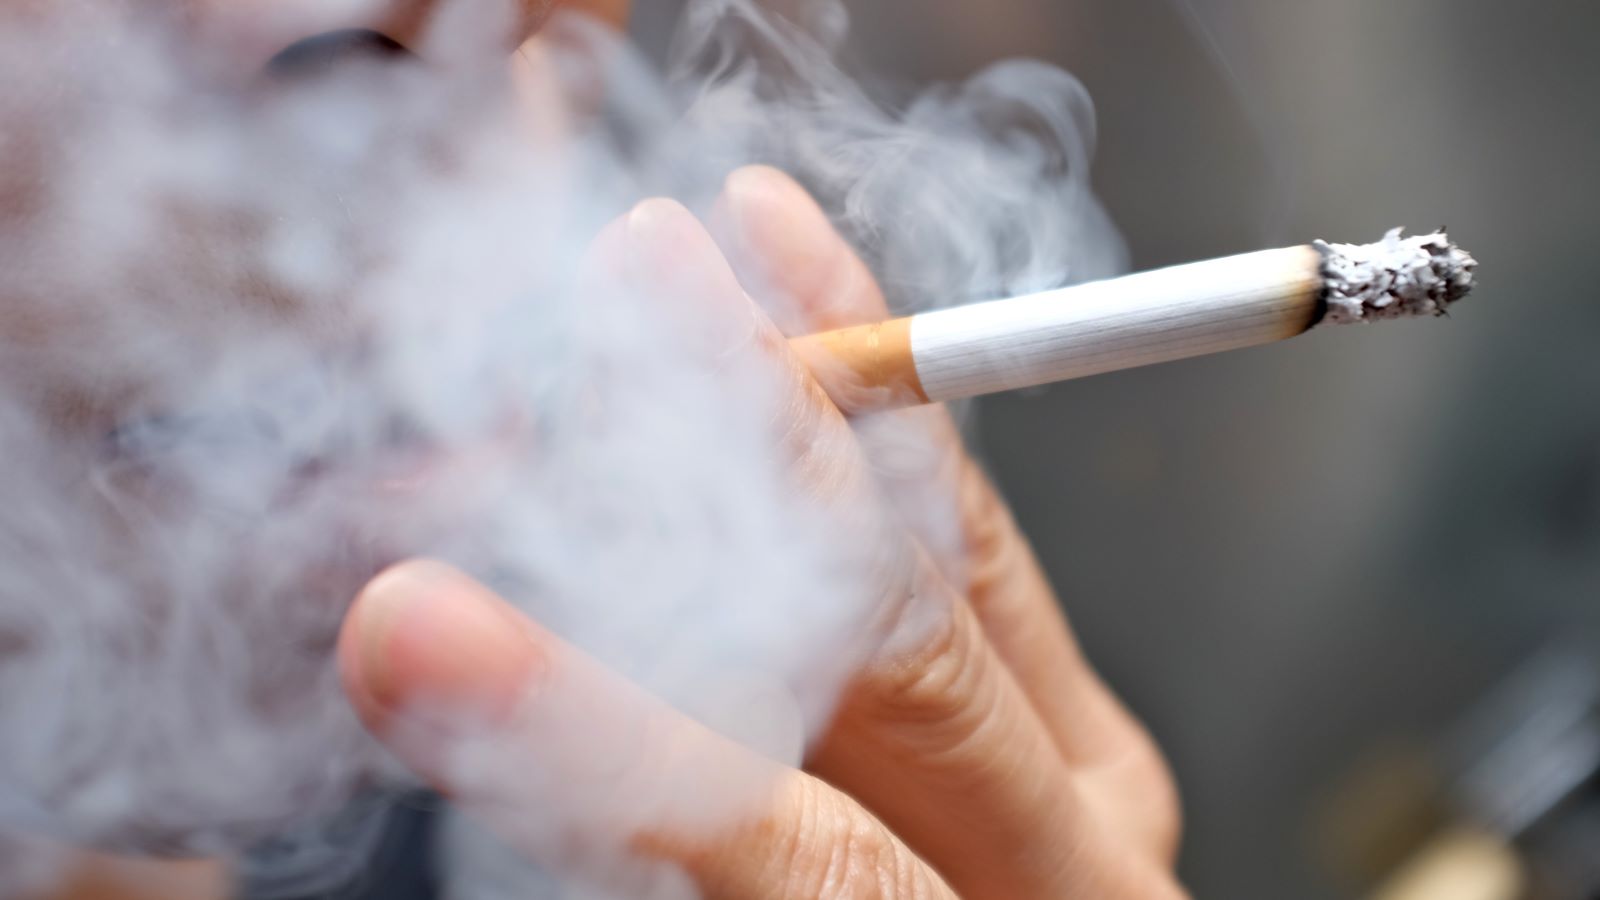 Are You a Former Smoker? You May Still Need to Get Screened for Lung Cancer